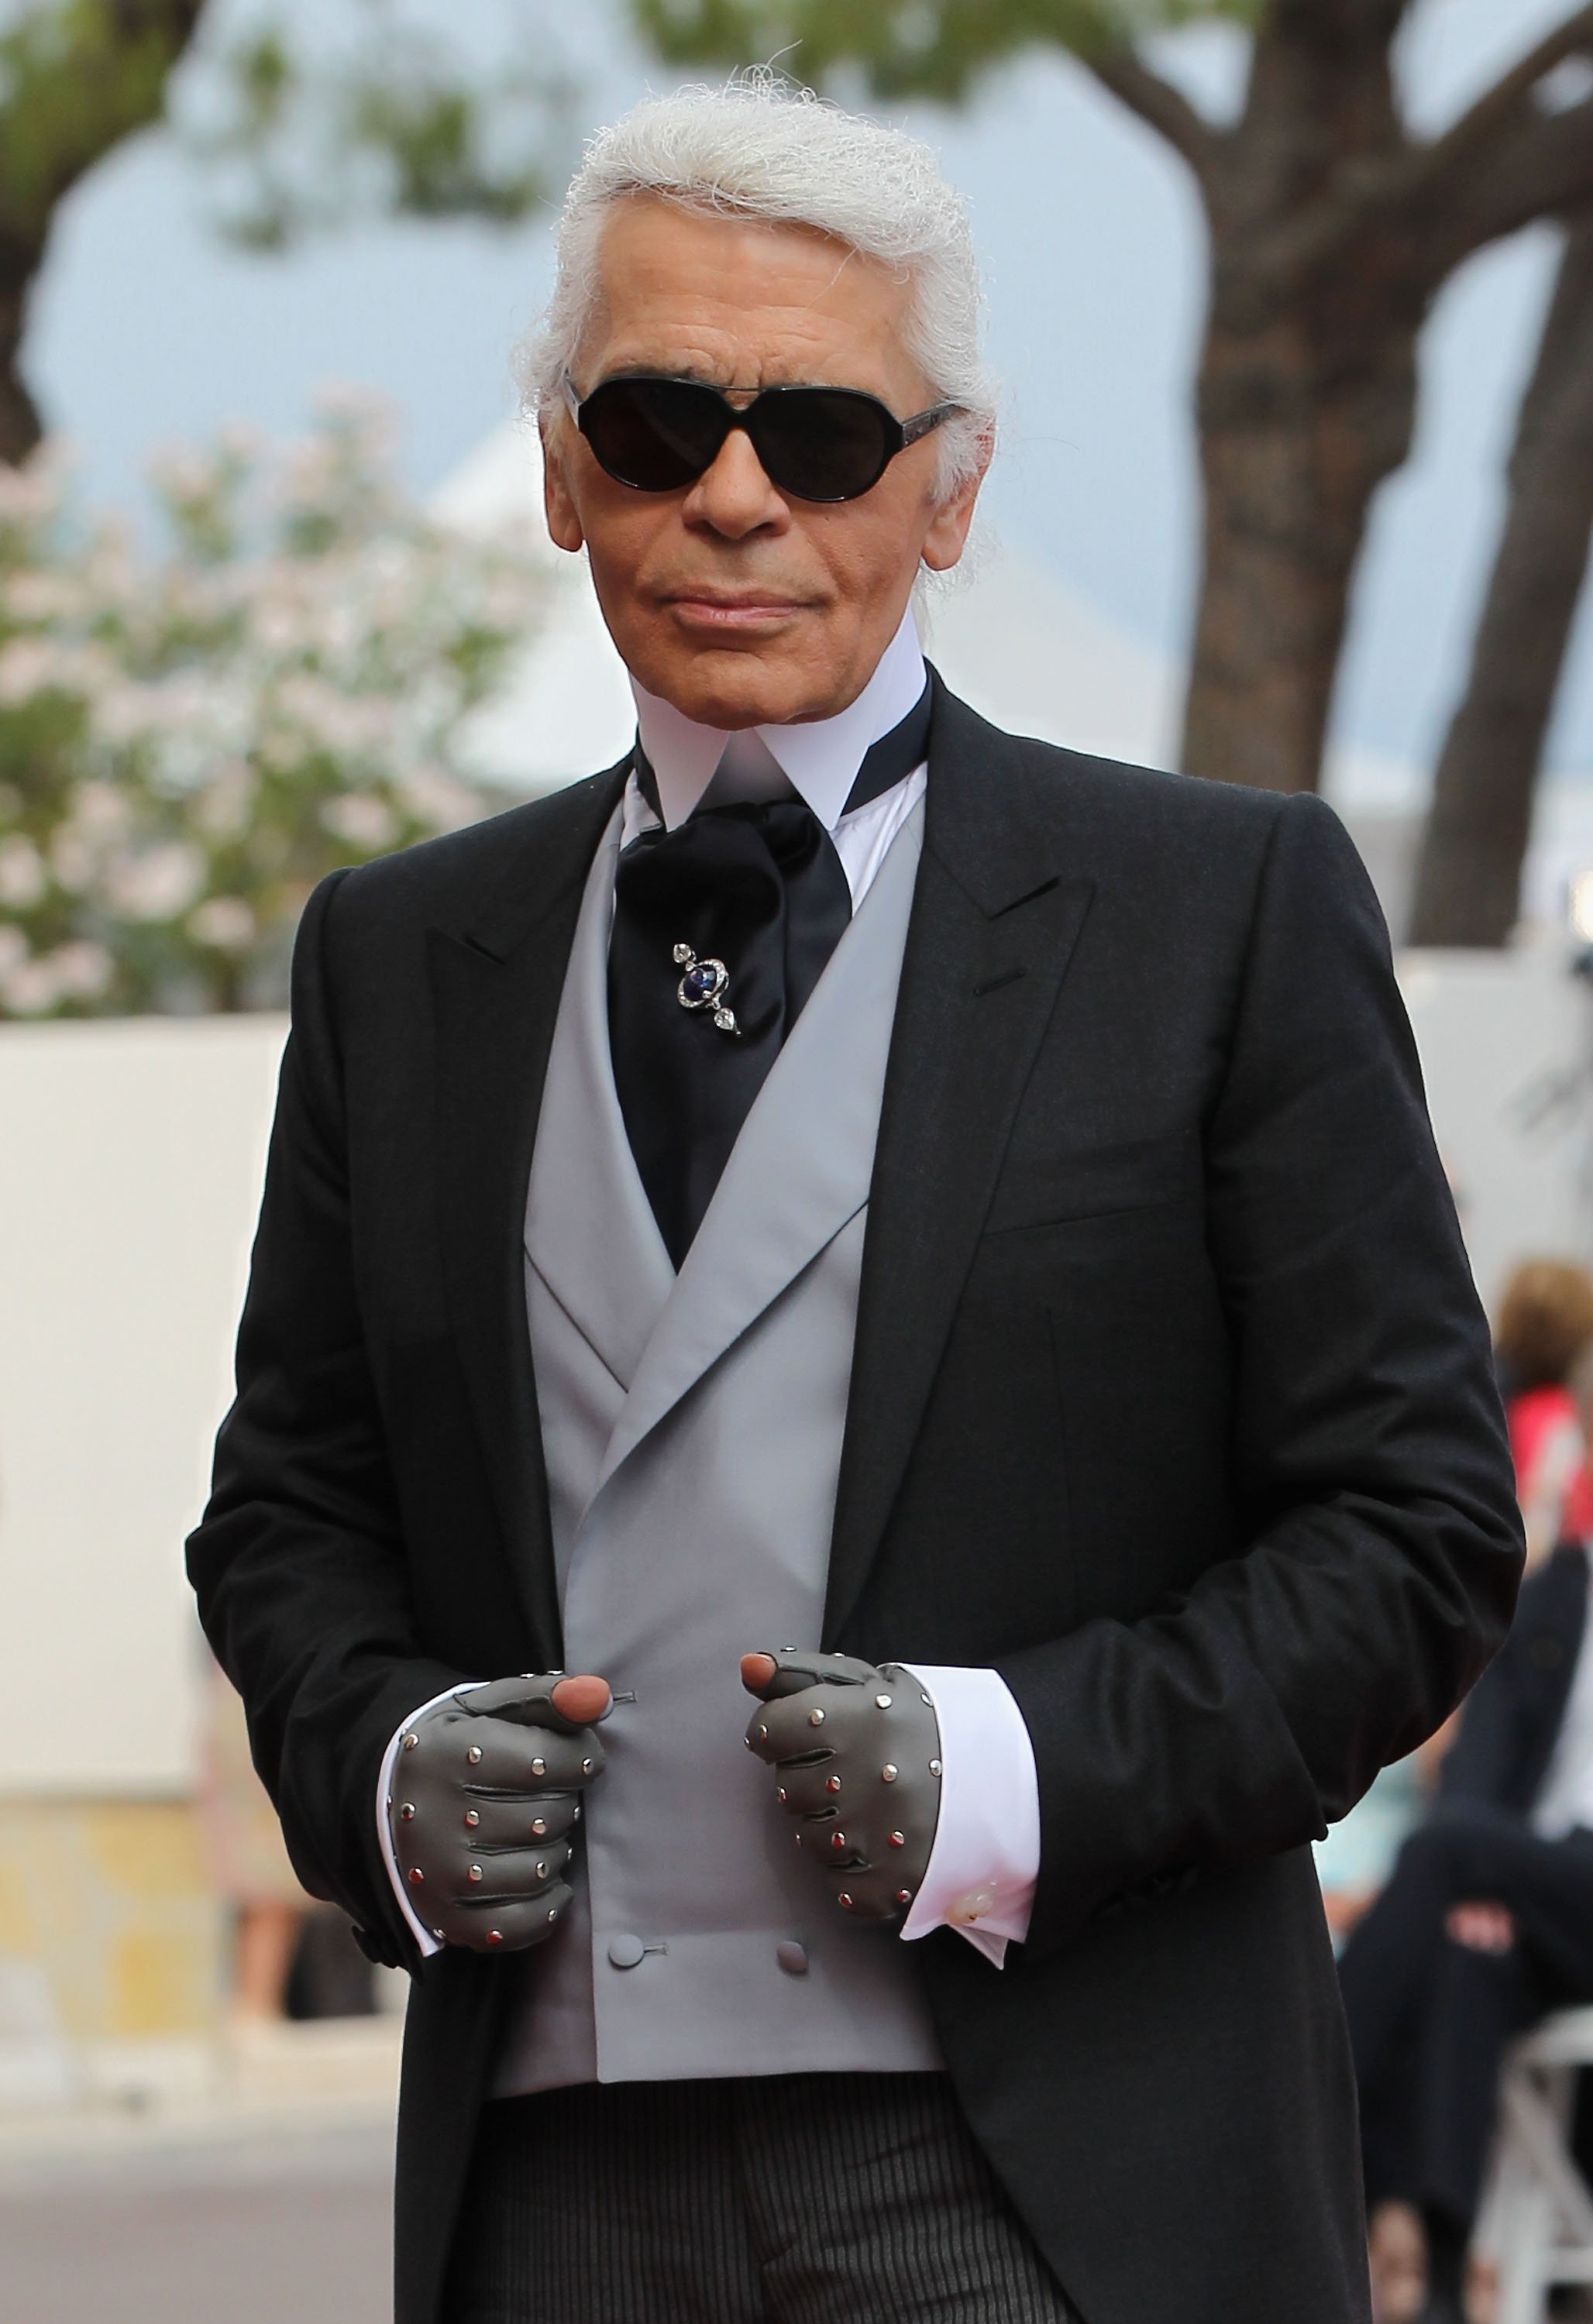 Situatie Kalksteen kanker The Met's Next Costume Institute Show and Gala Will Pay Homage to Karl  Lagerfeld, the 'Hitchcock of Fashion'